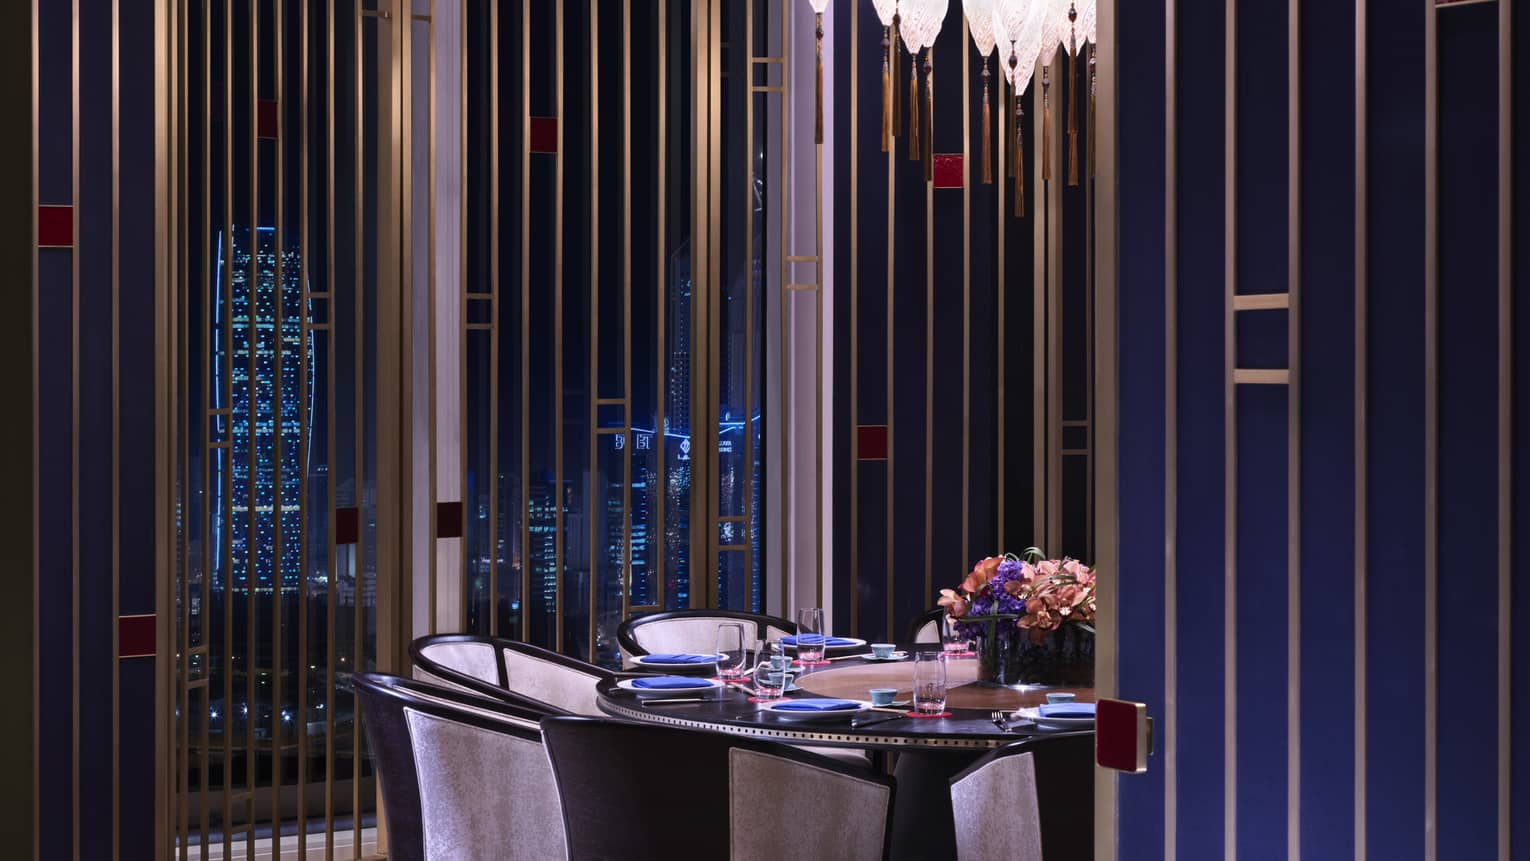 Elegant round dining table, chairs under small crystal light in front of window with city views at night